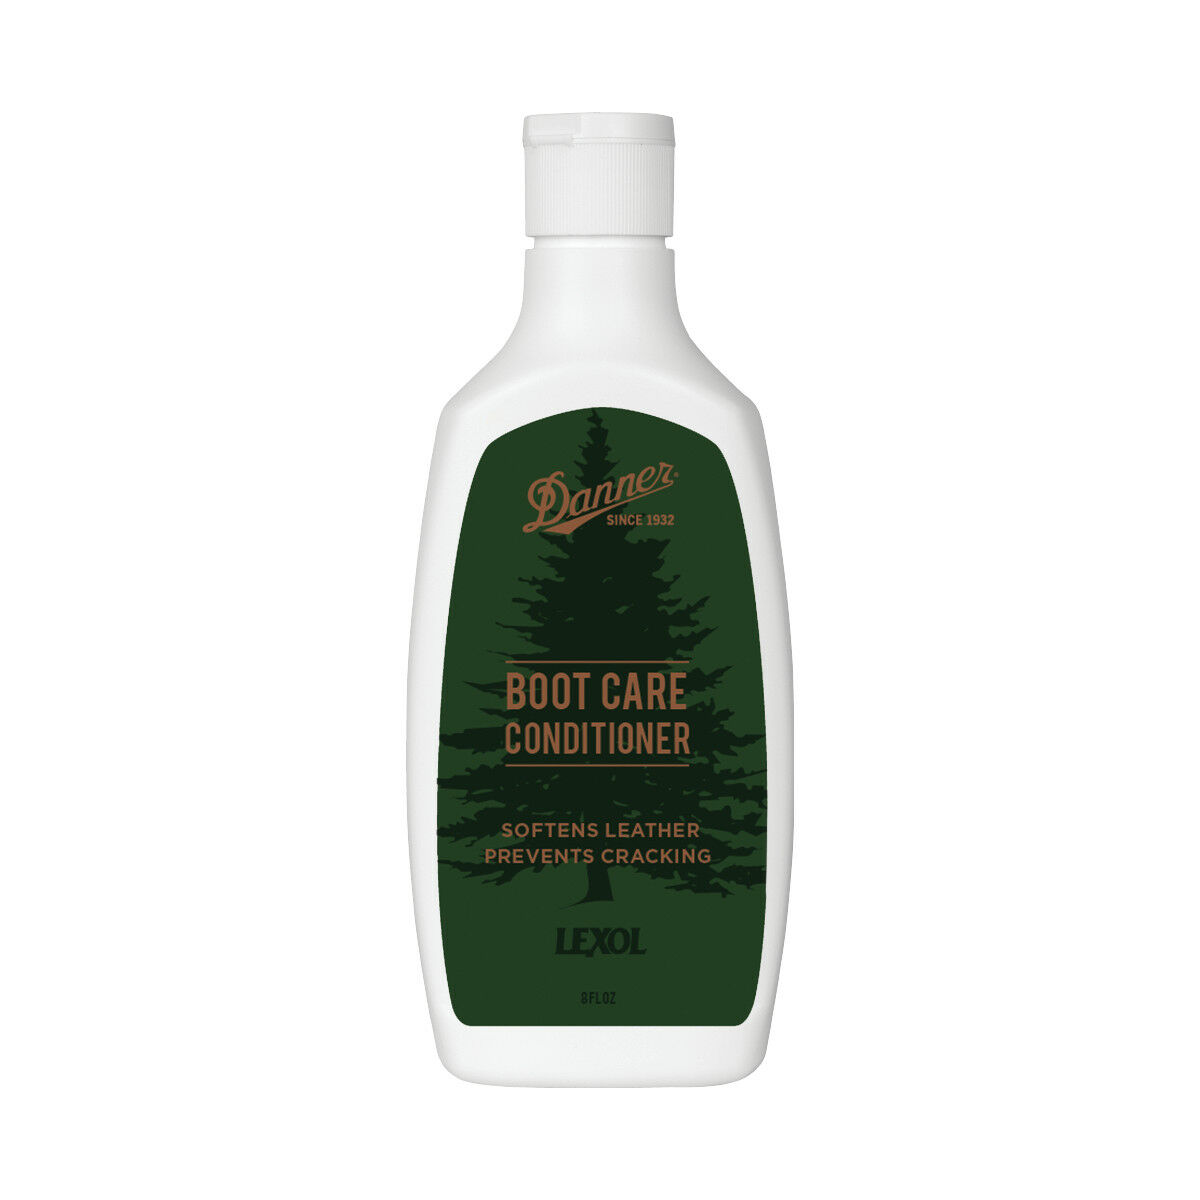 Danner Leather Conditioner